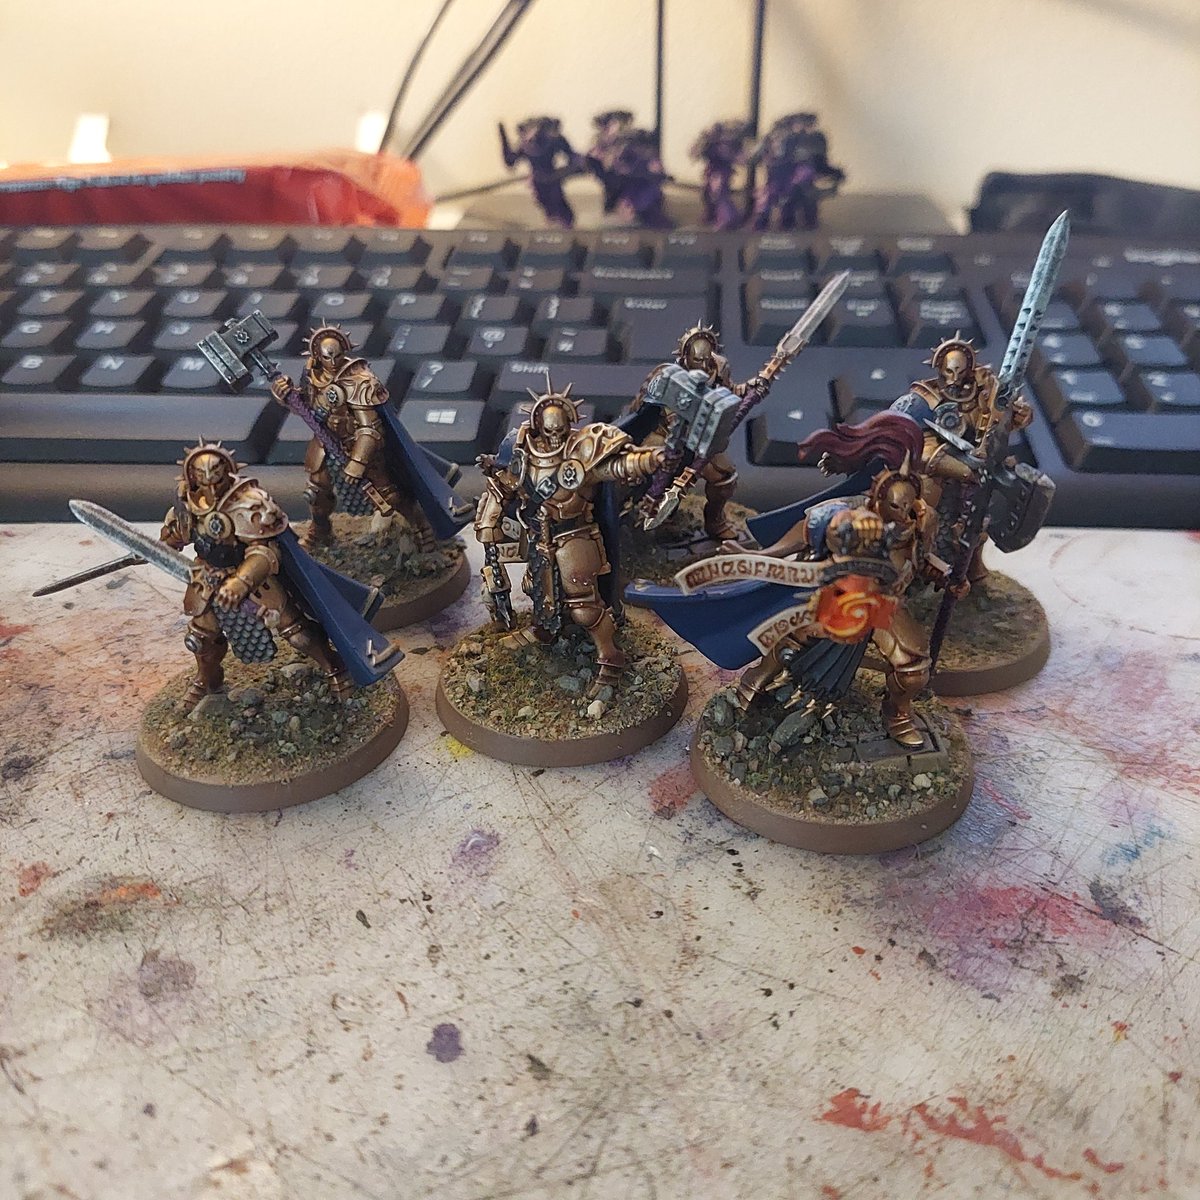 Continuing my burst of enthusiasm for skirmish games. I managed to paint up a stormcast warcry warband that has been sat on my desk for some time. Turns out a chill hobby evening with a friend is a great motivator! #WarhammerCommunity